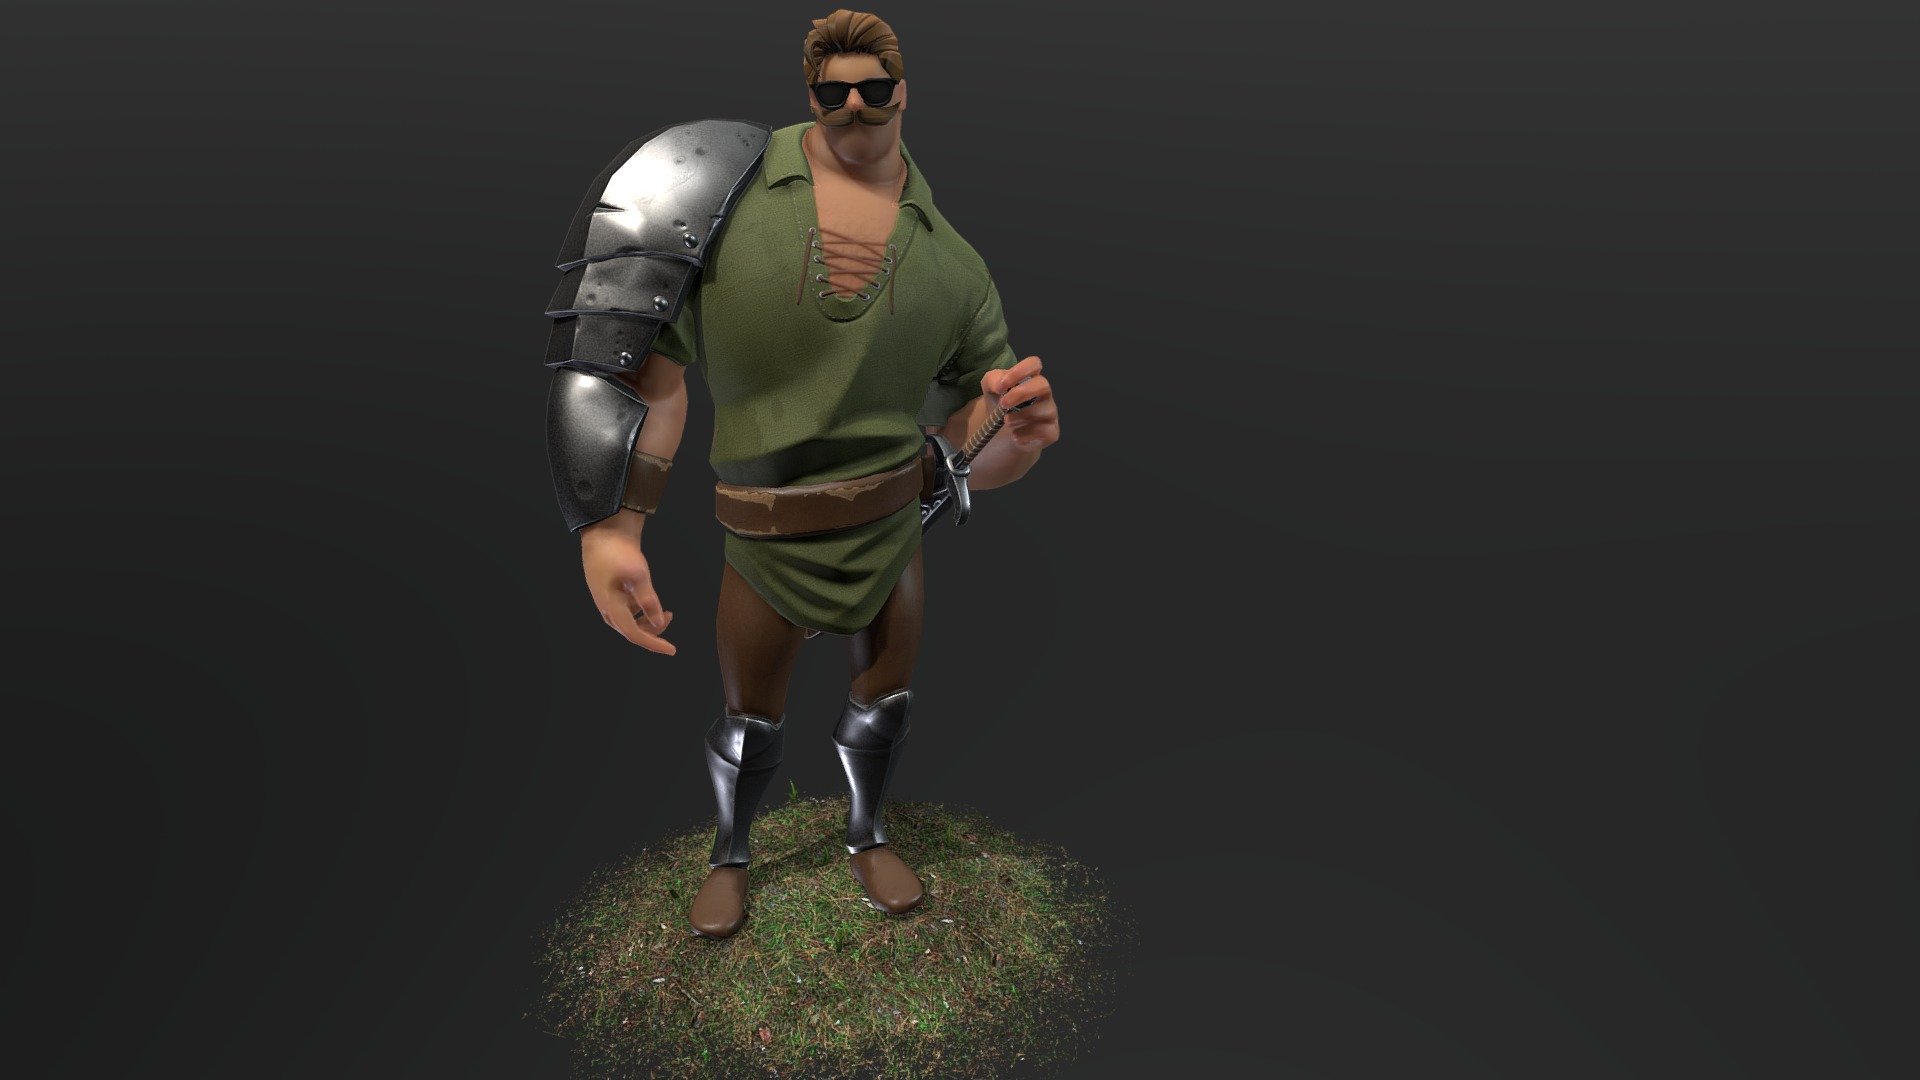 this is a stylized male heroic knight character who skipped leg day.
Going for a Fortnite style.
Full PBR textures, Animation ready 3d model